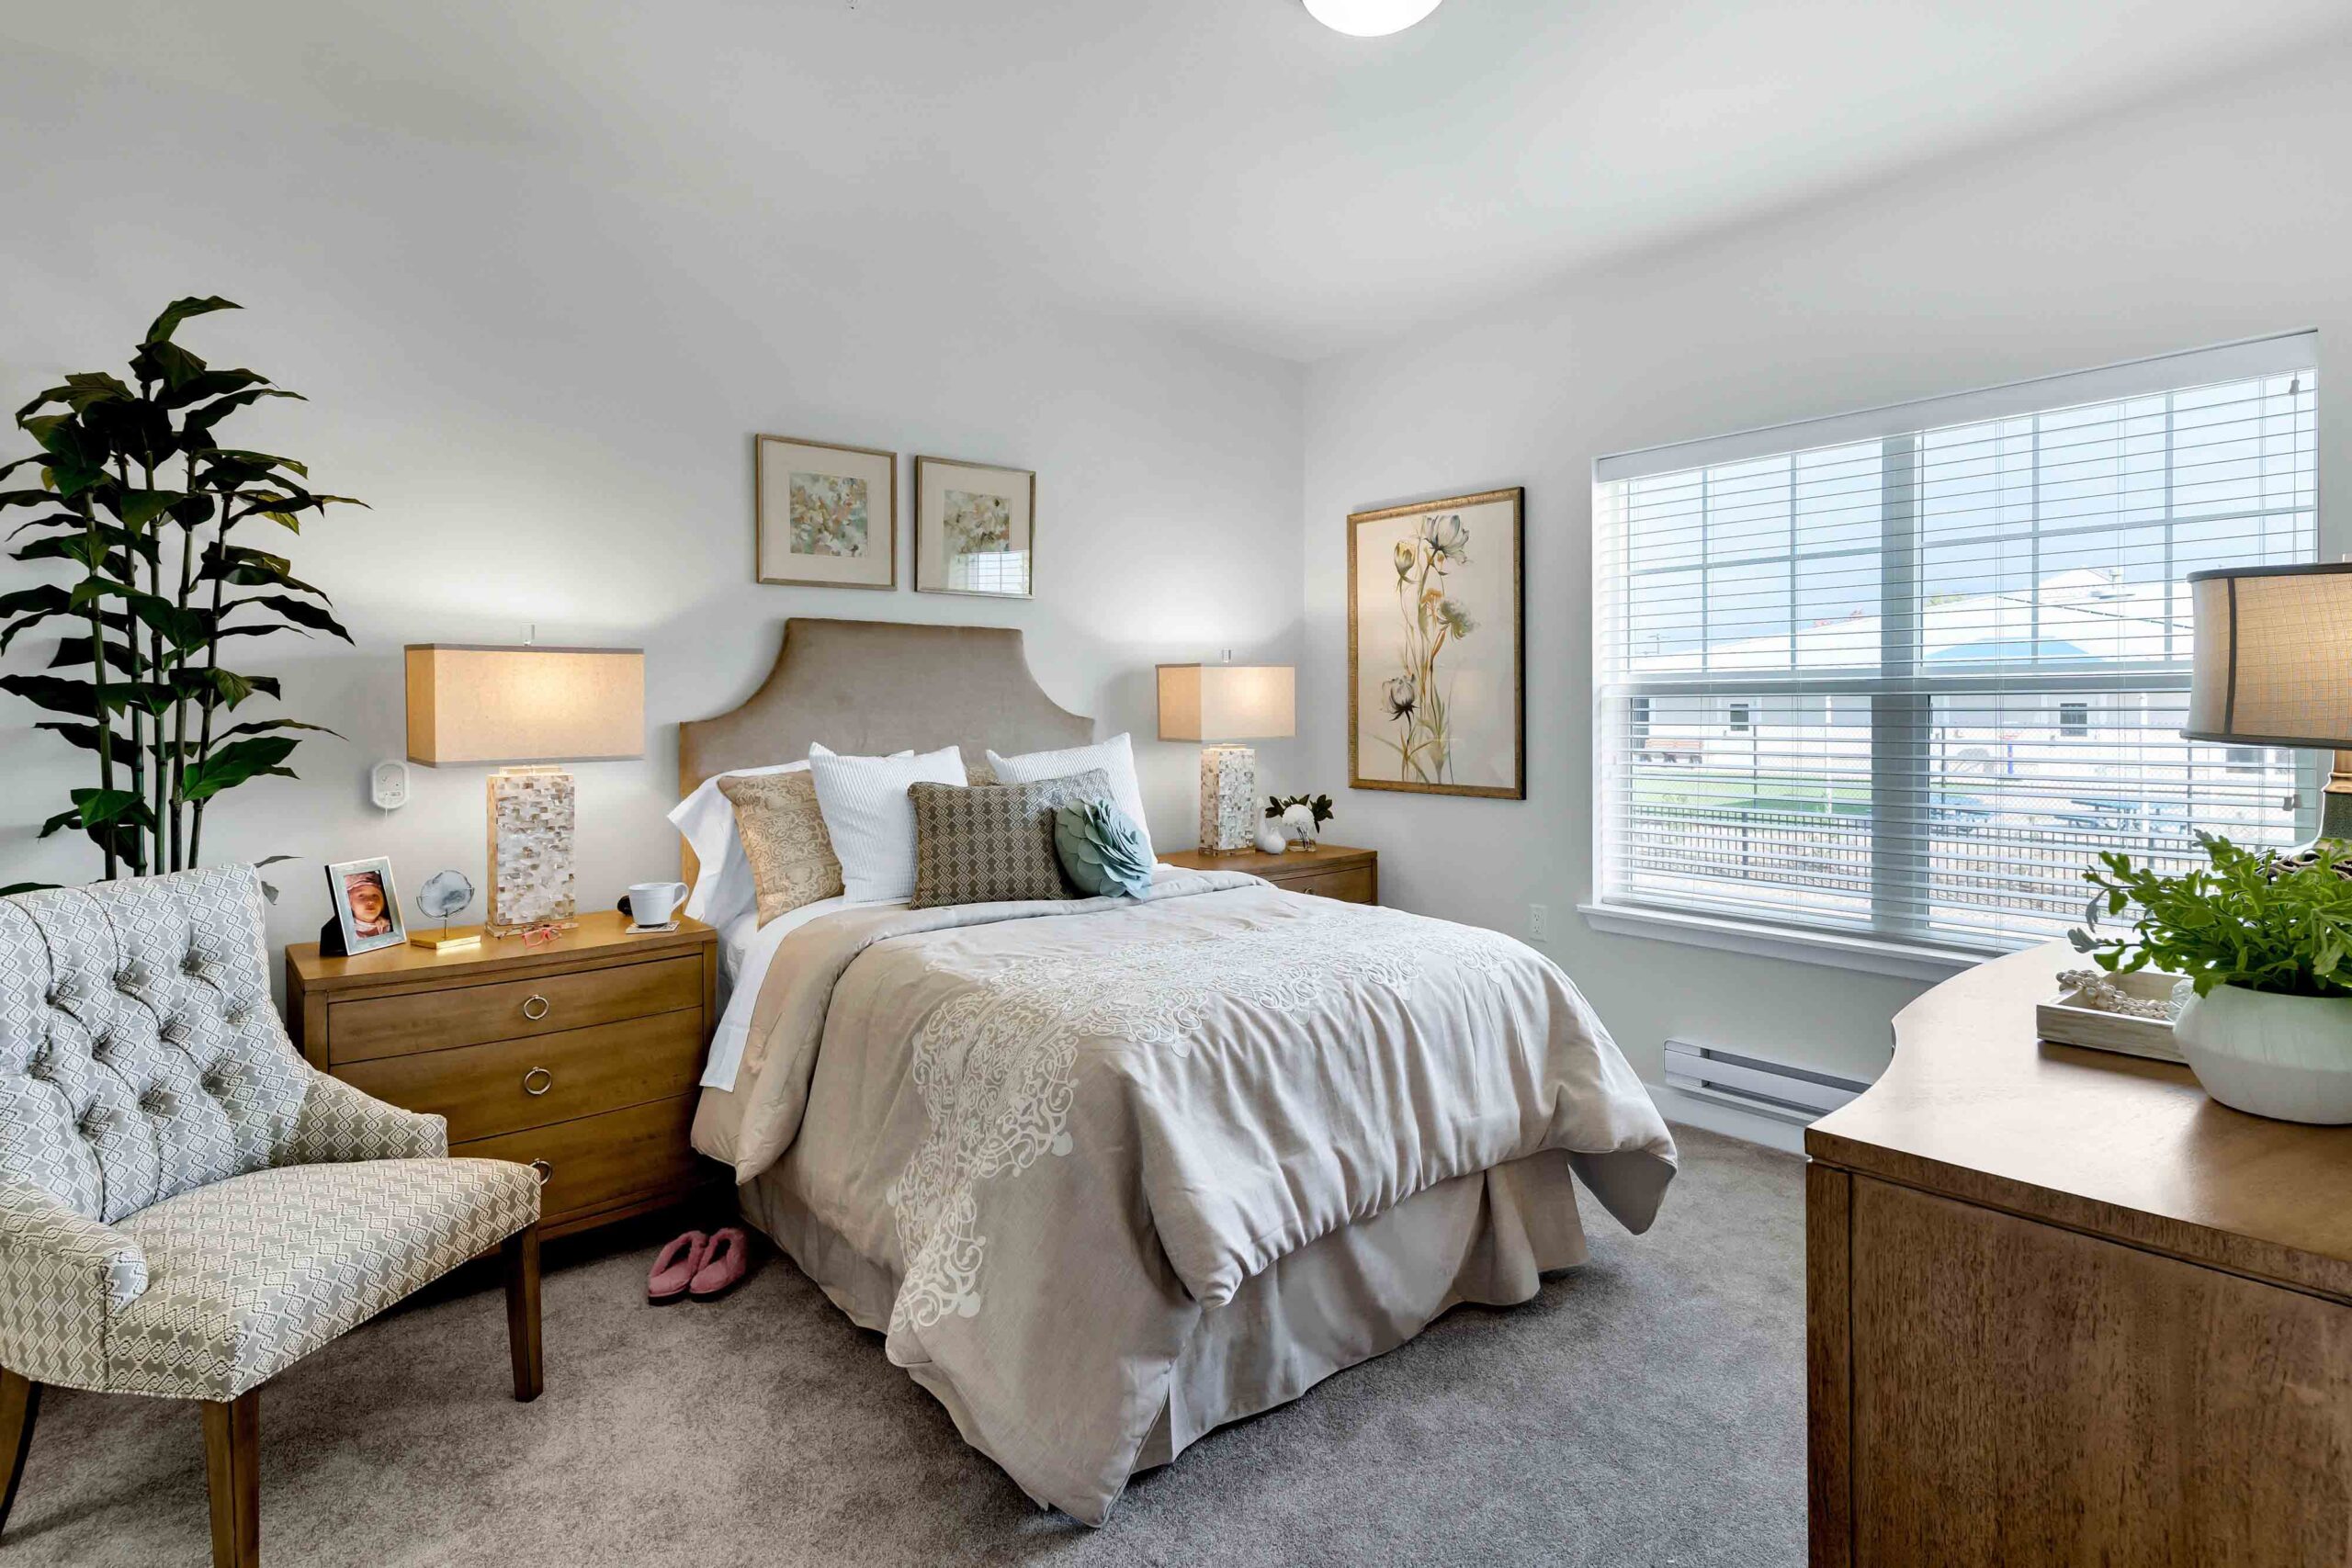 A bright and cozy bedroom with a large bed adorned with neutral-toned bedding and decorative pillows. Two wooden nightstands flank the bed, each with a lamp. A cushioned chair sits to the side, and sunlight streams in through a large window with blinds.